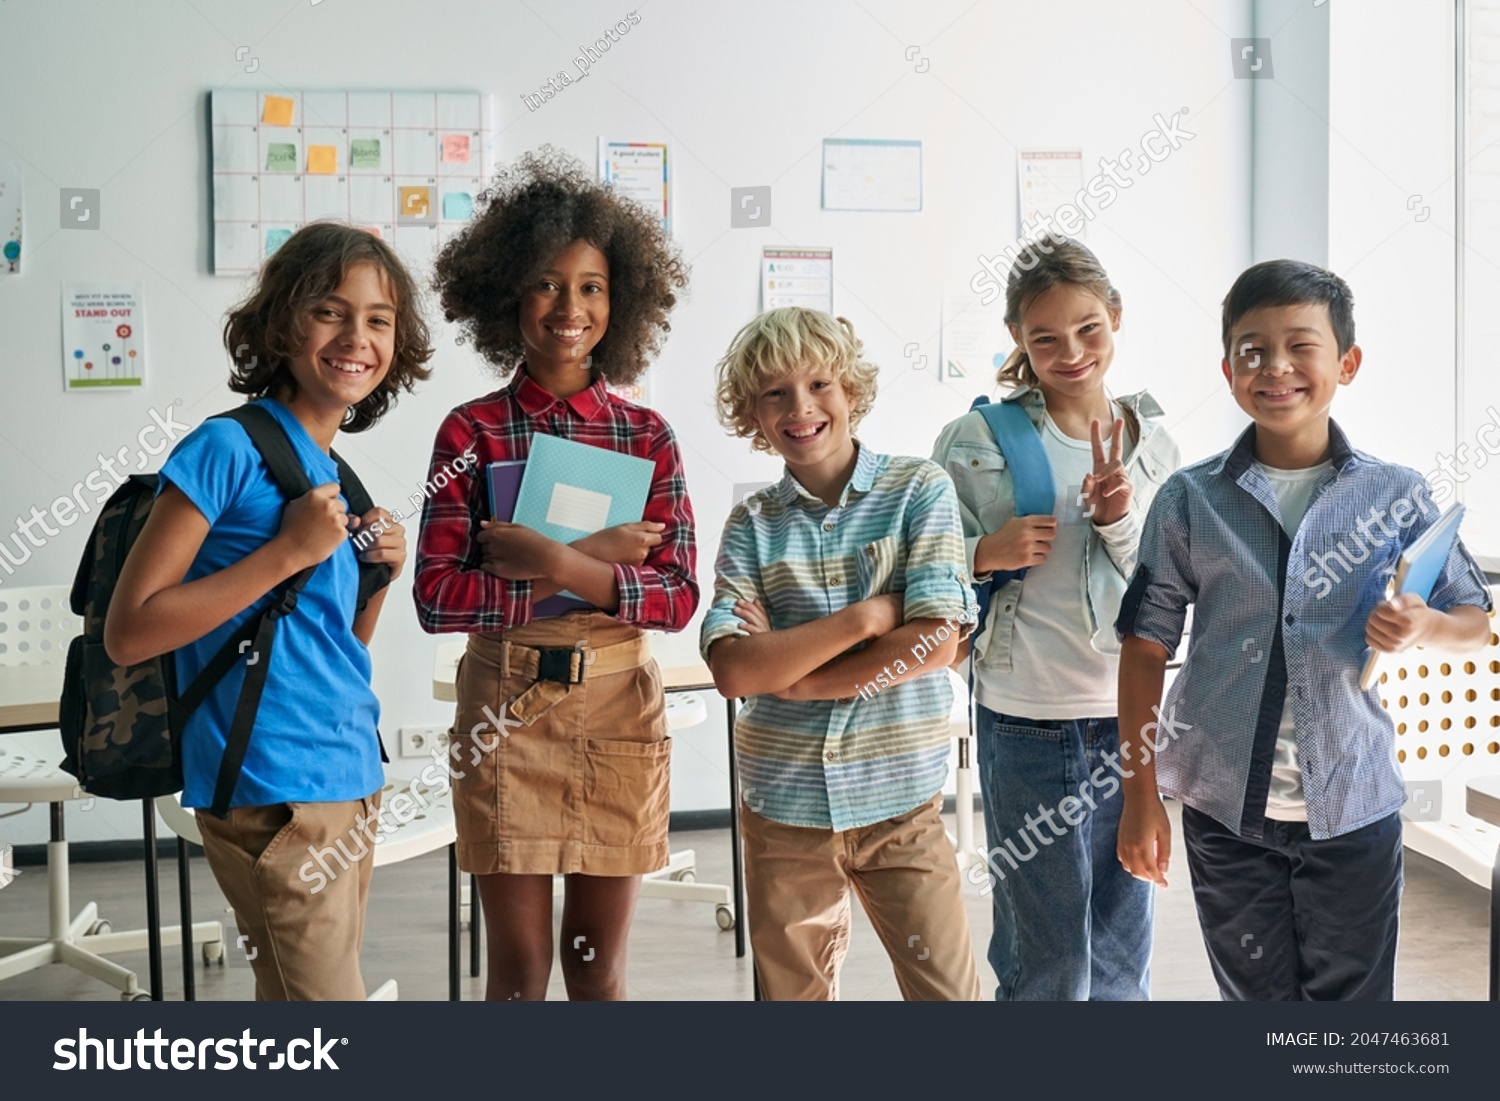 Portrait of cheerful smiling diverse schoolchildren standing posing in classroom holding notebooks and backpacks looking at camera happy after school reopen. Diversity. Back to school concept. #2047463681